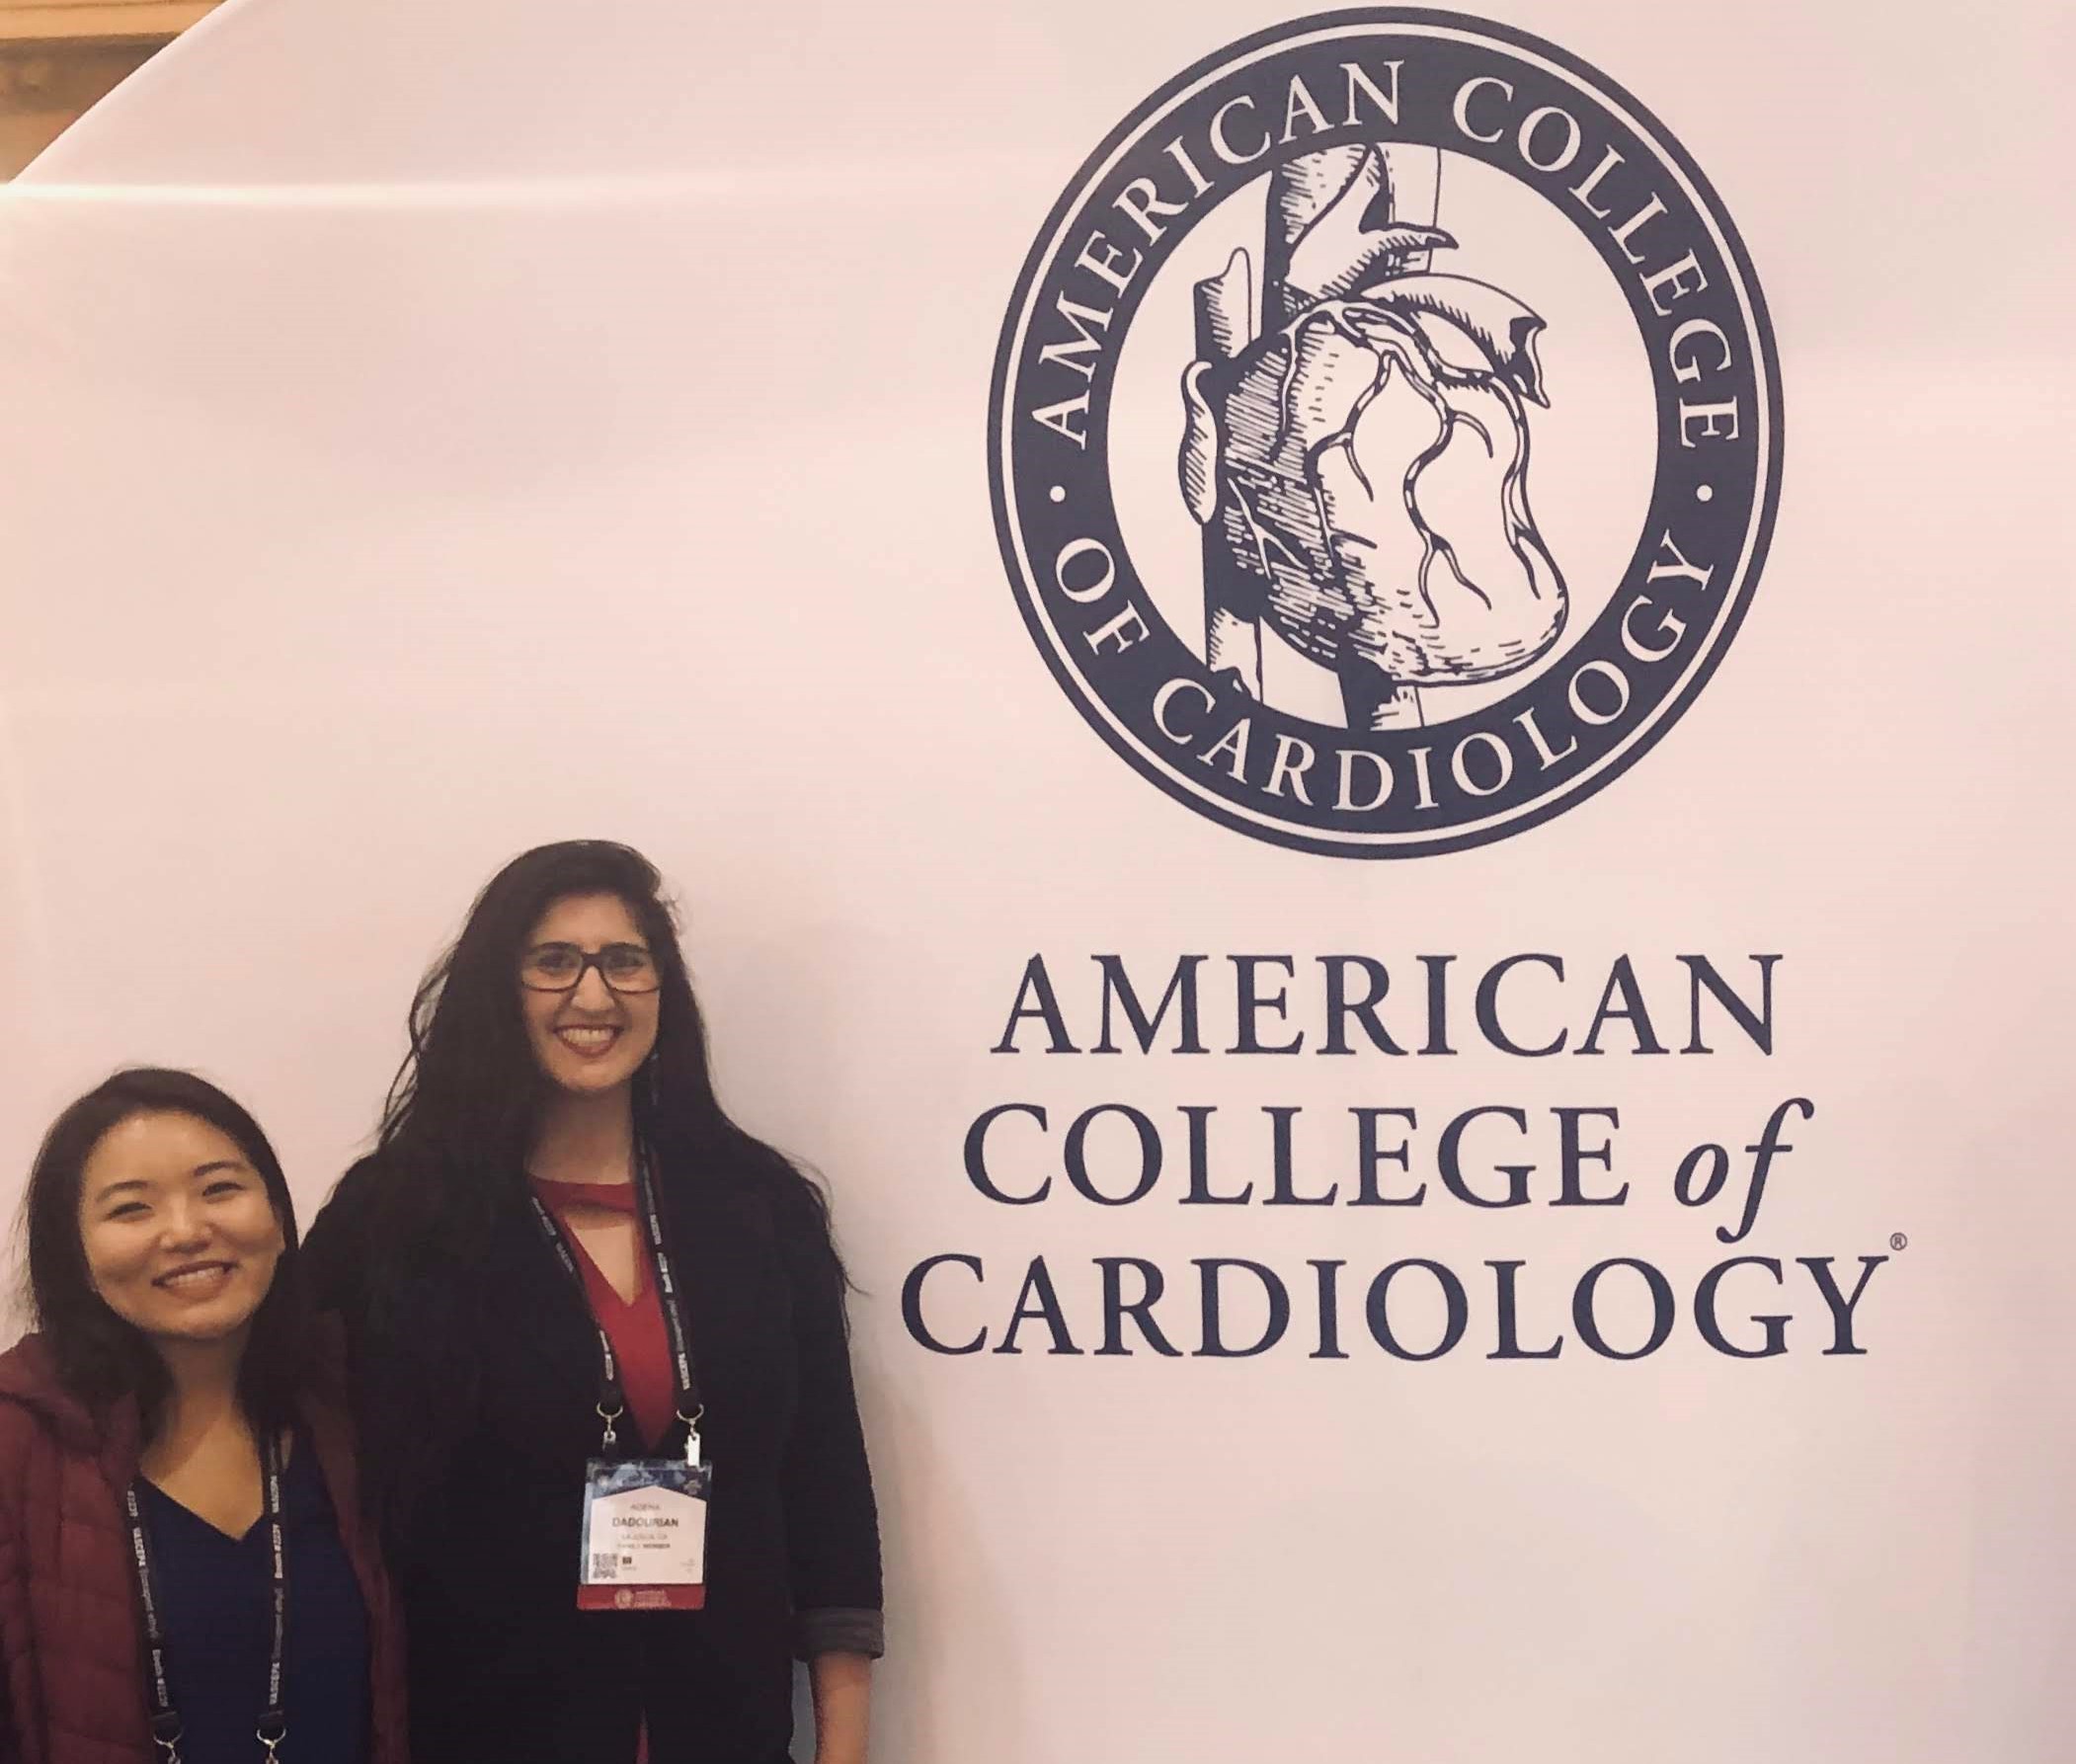 American College of Cardiology Annual Meeting, March 2019